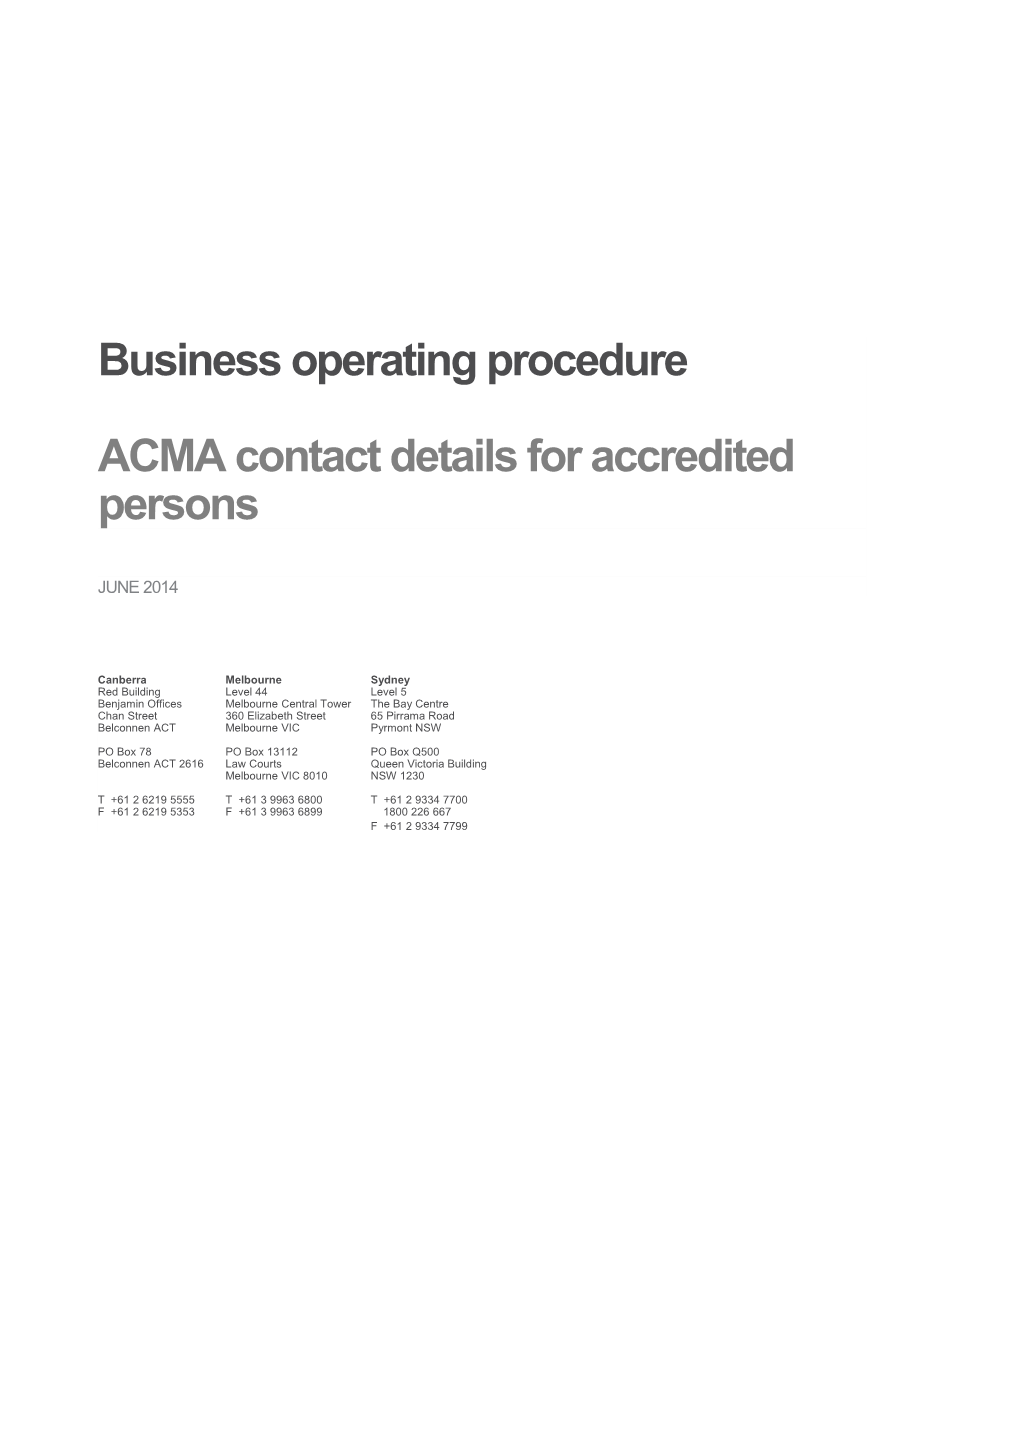 ACMA Contact Directory for Accredited Persons